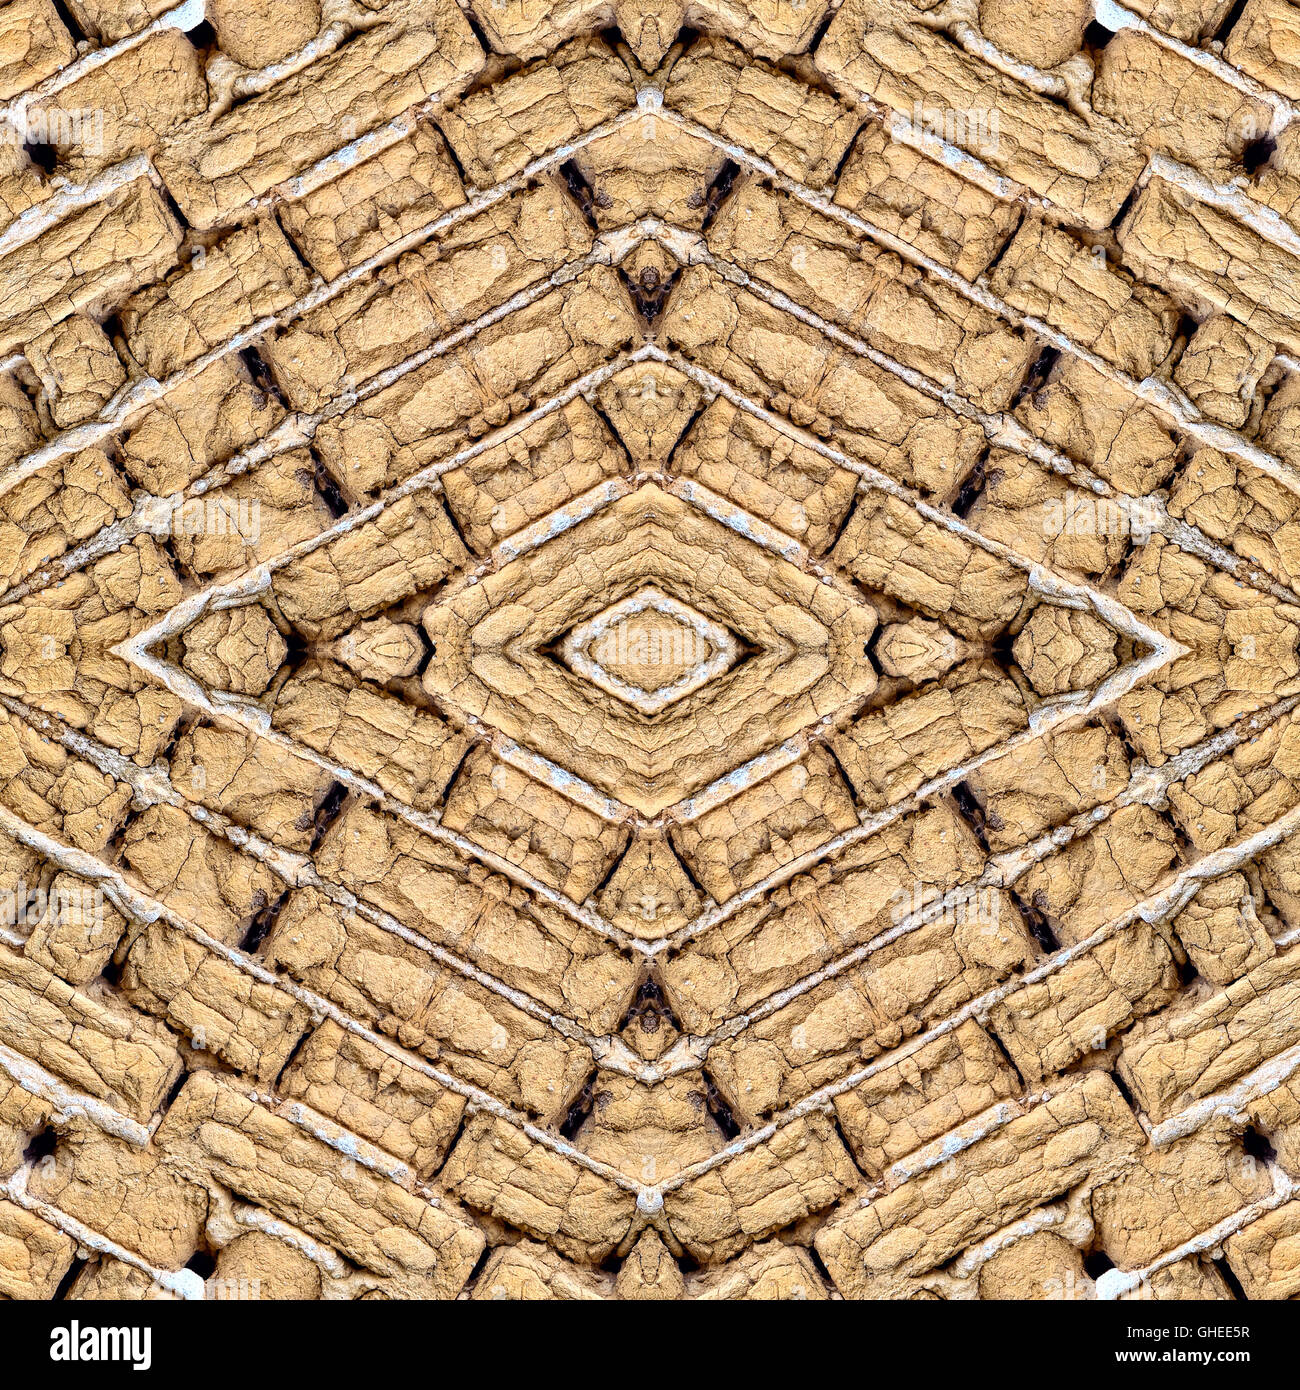 Seamless abstract architecture design for background, wallpaper, print or any use based on rustic wall of raw adobe bricks. Stock Photo